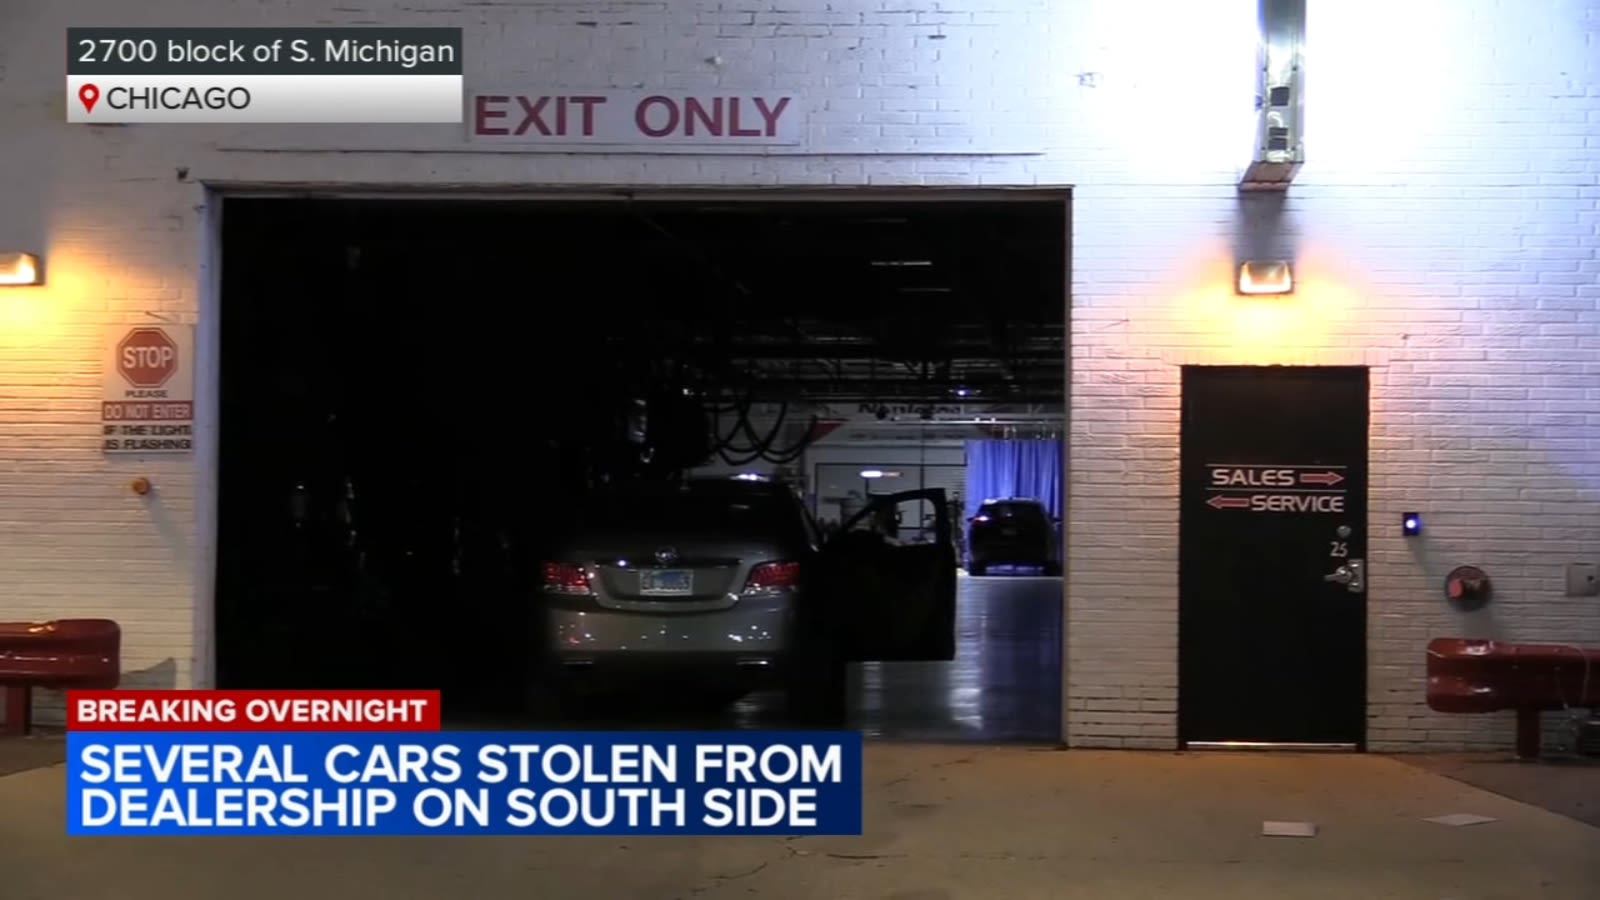 Burglars steal at least 4 cars from South Side dealership, Chicago police say